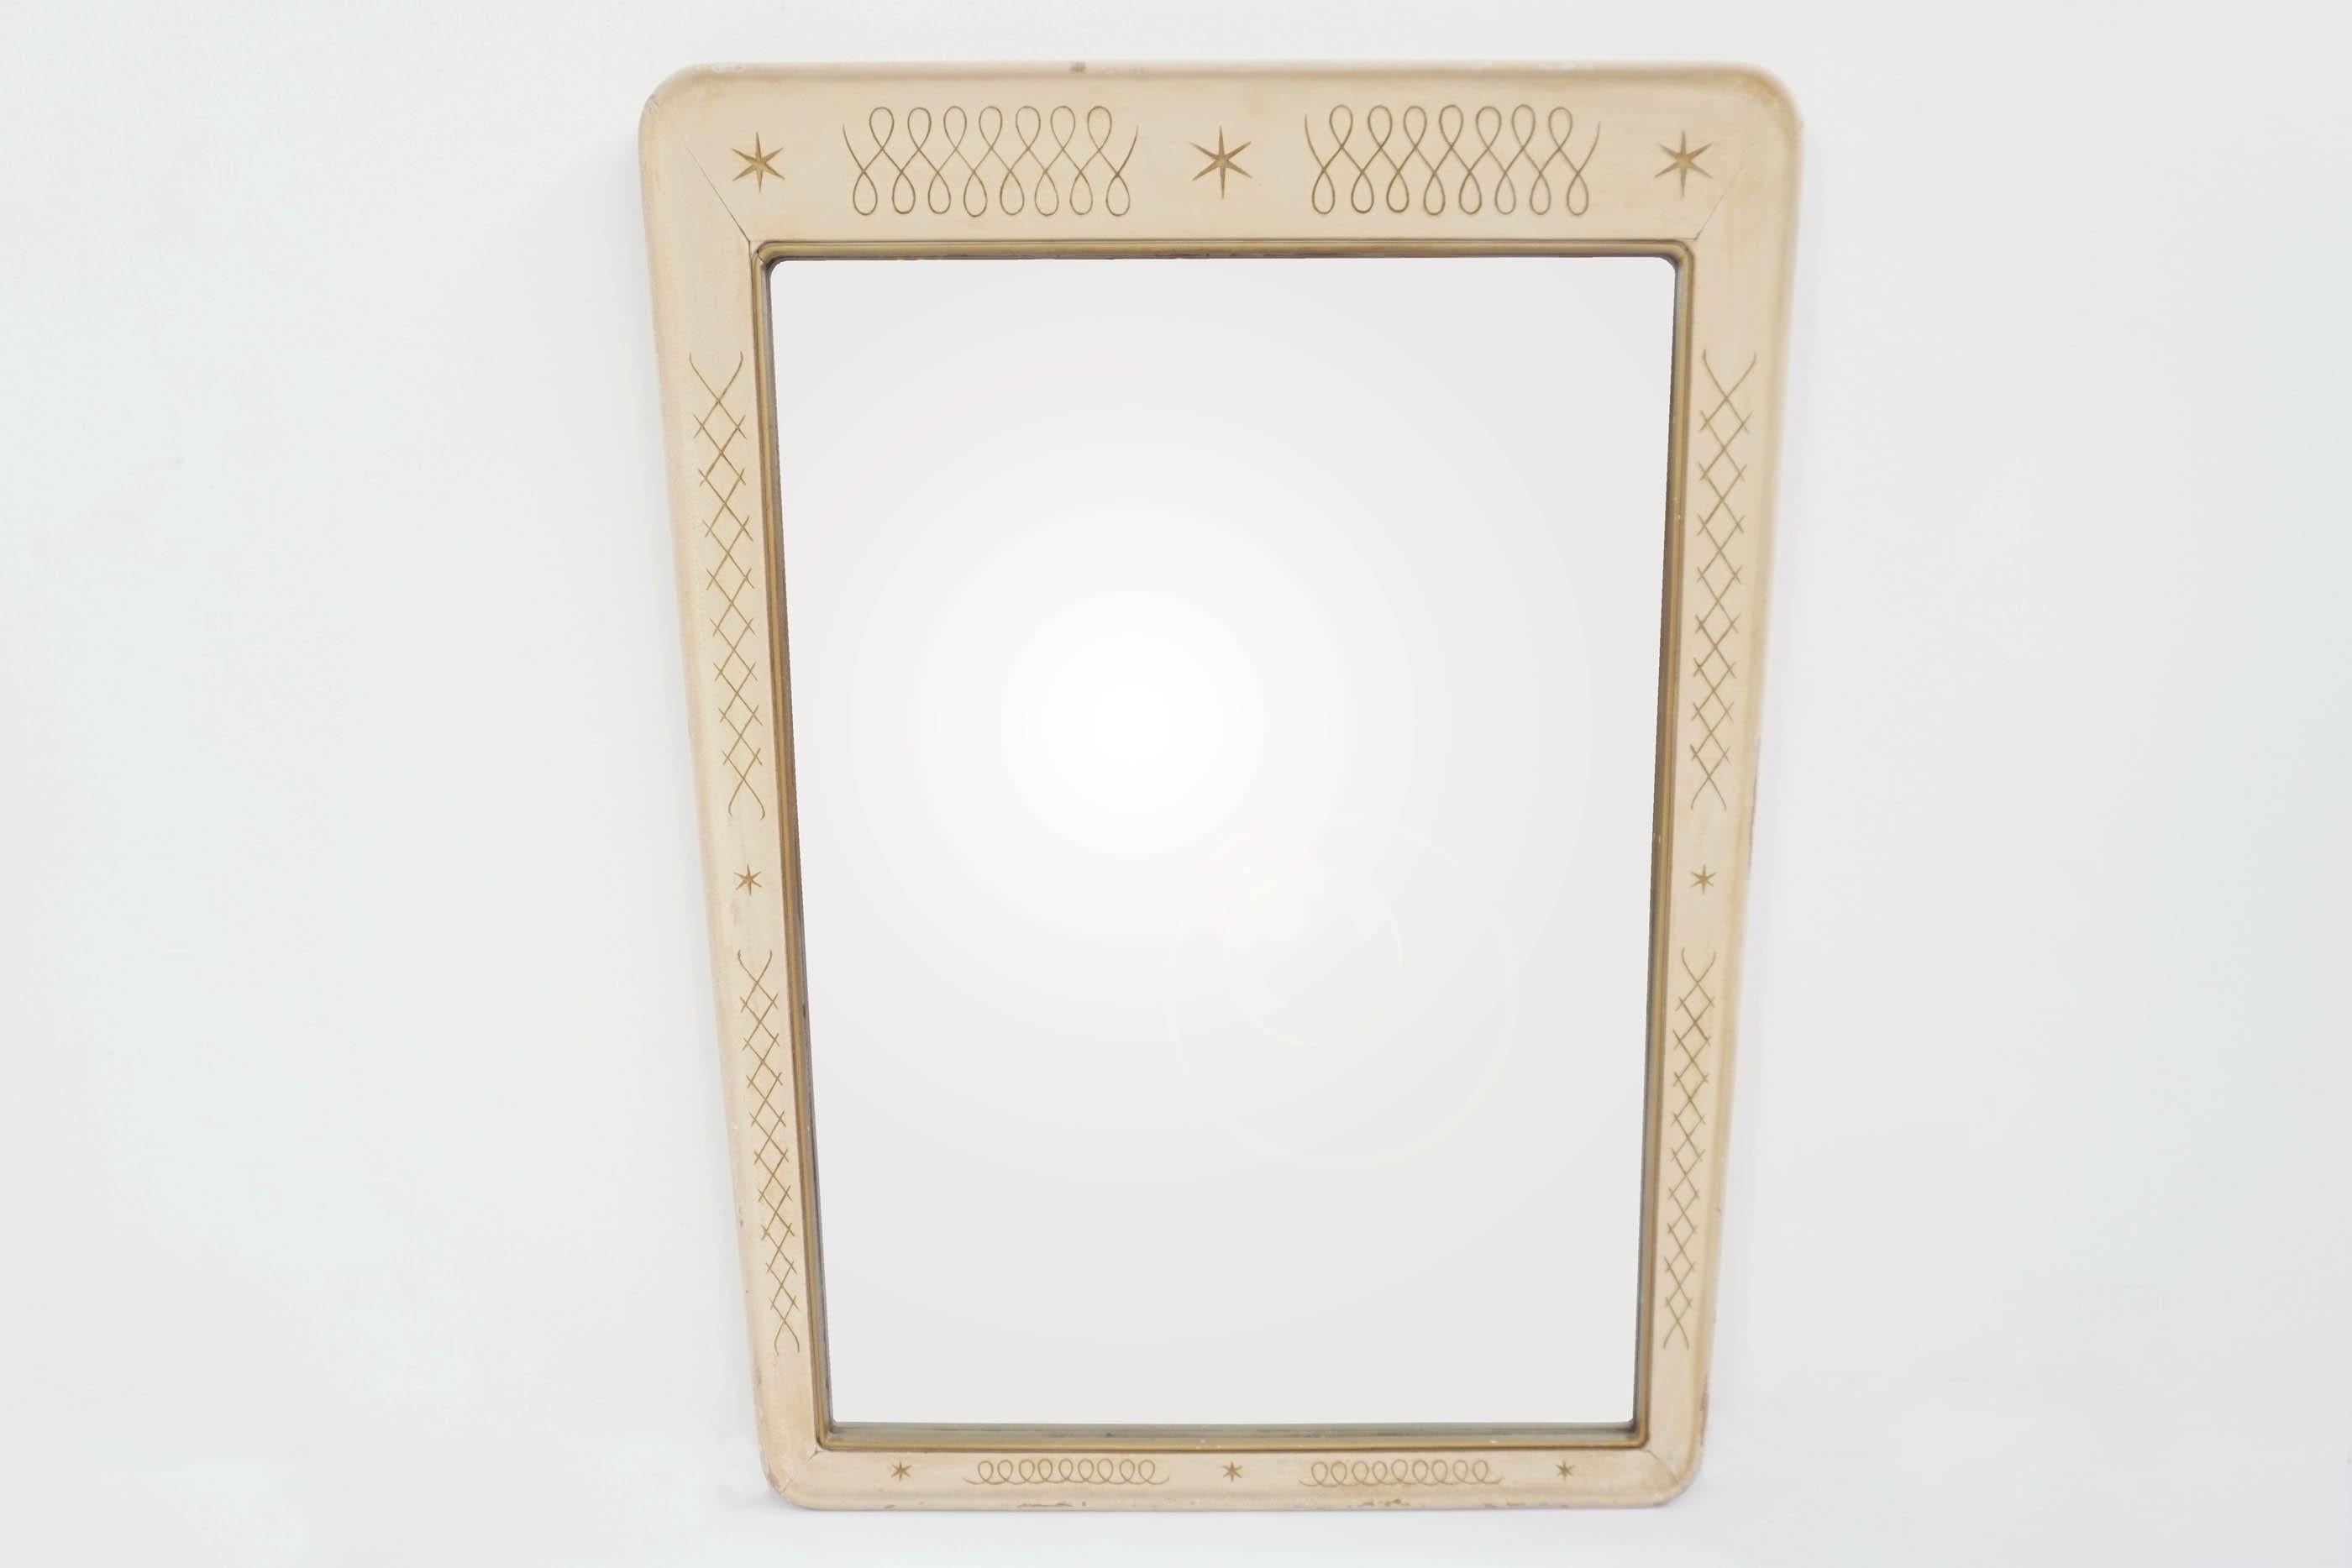 Super elegant mirror
Made in turned lacquered wood with engraved stars painted in gold color.